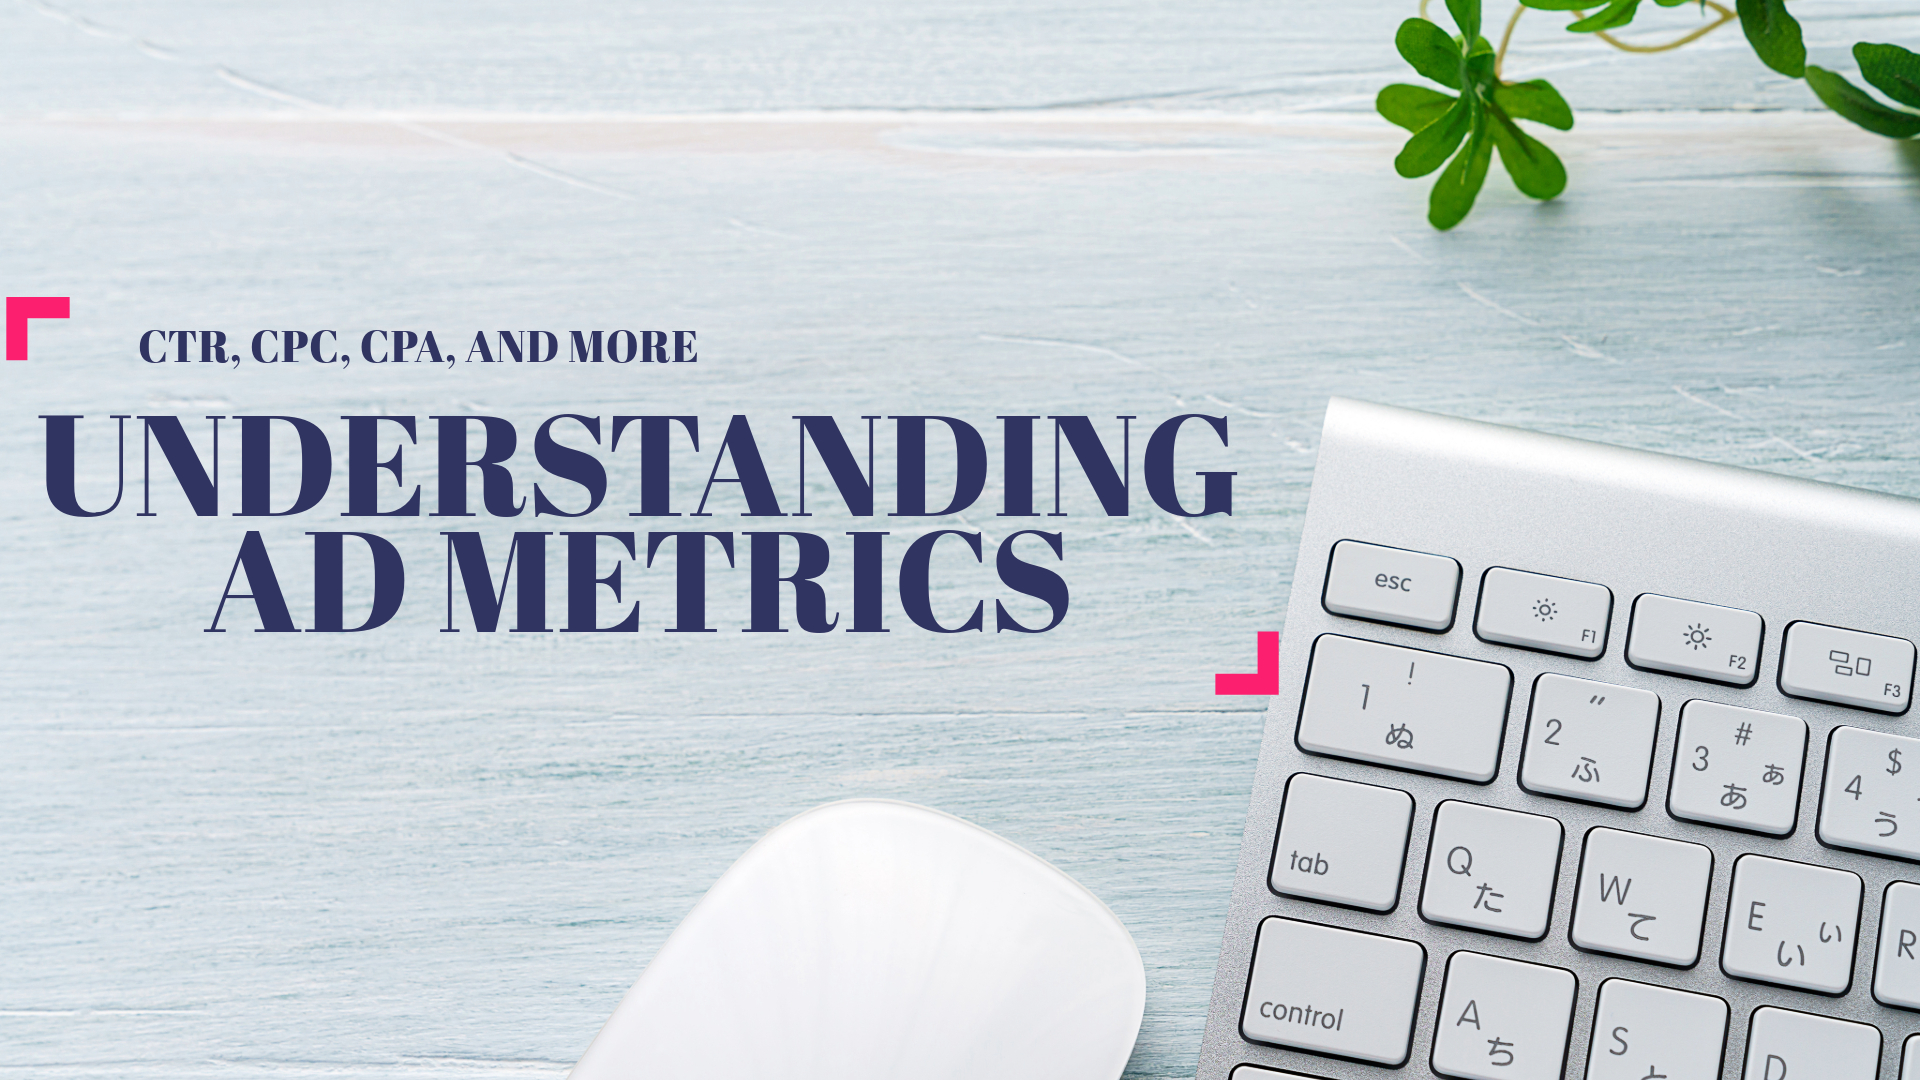 Understanding Ad Metrics: CTR, CPC, CPA, and More